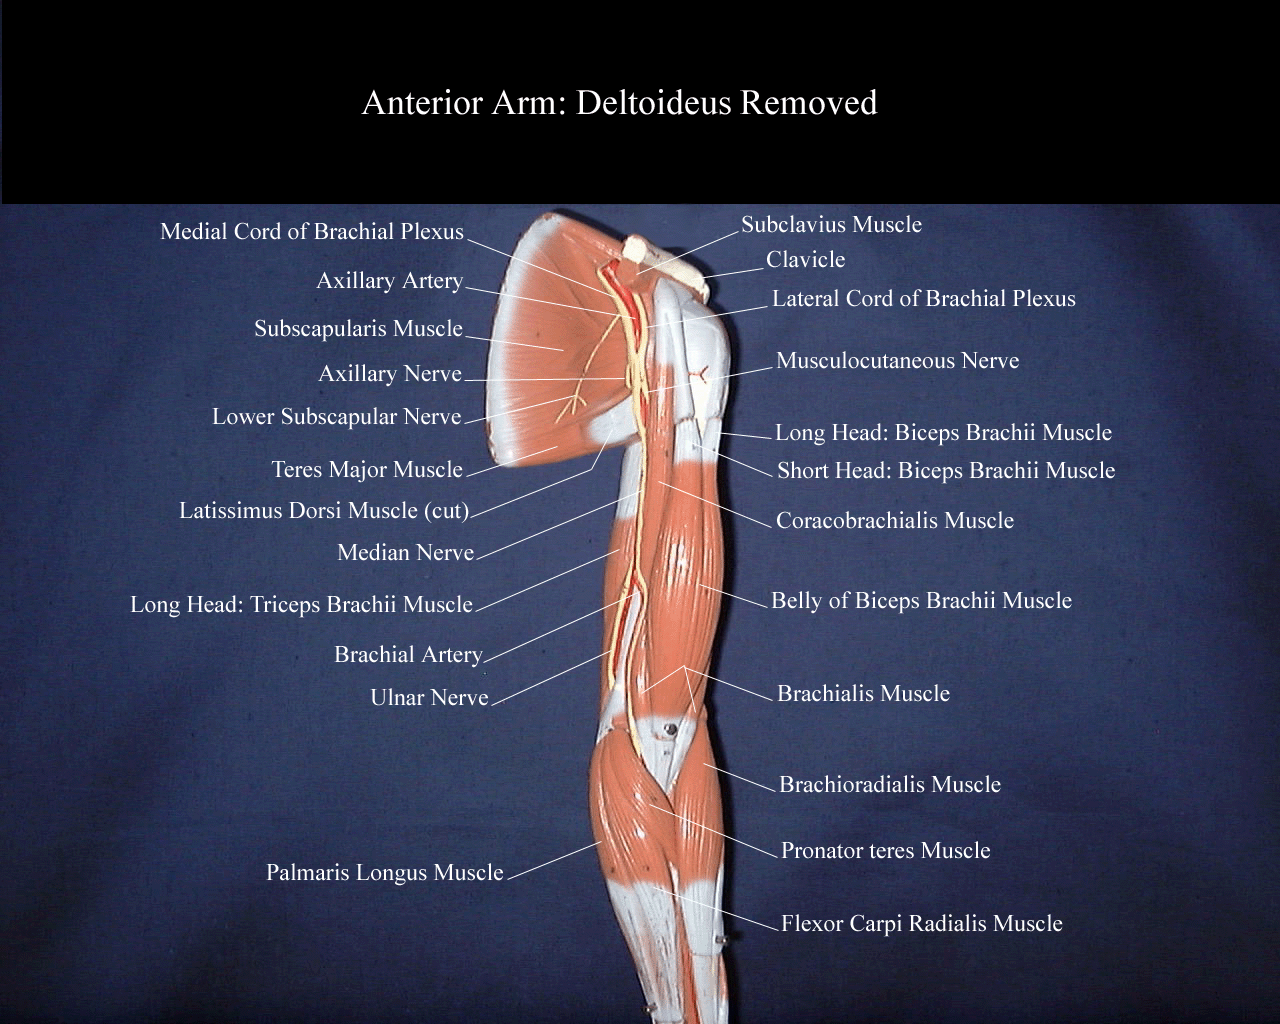 a picture of a model of the anterior arm with the deltoideus muscle removed